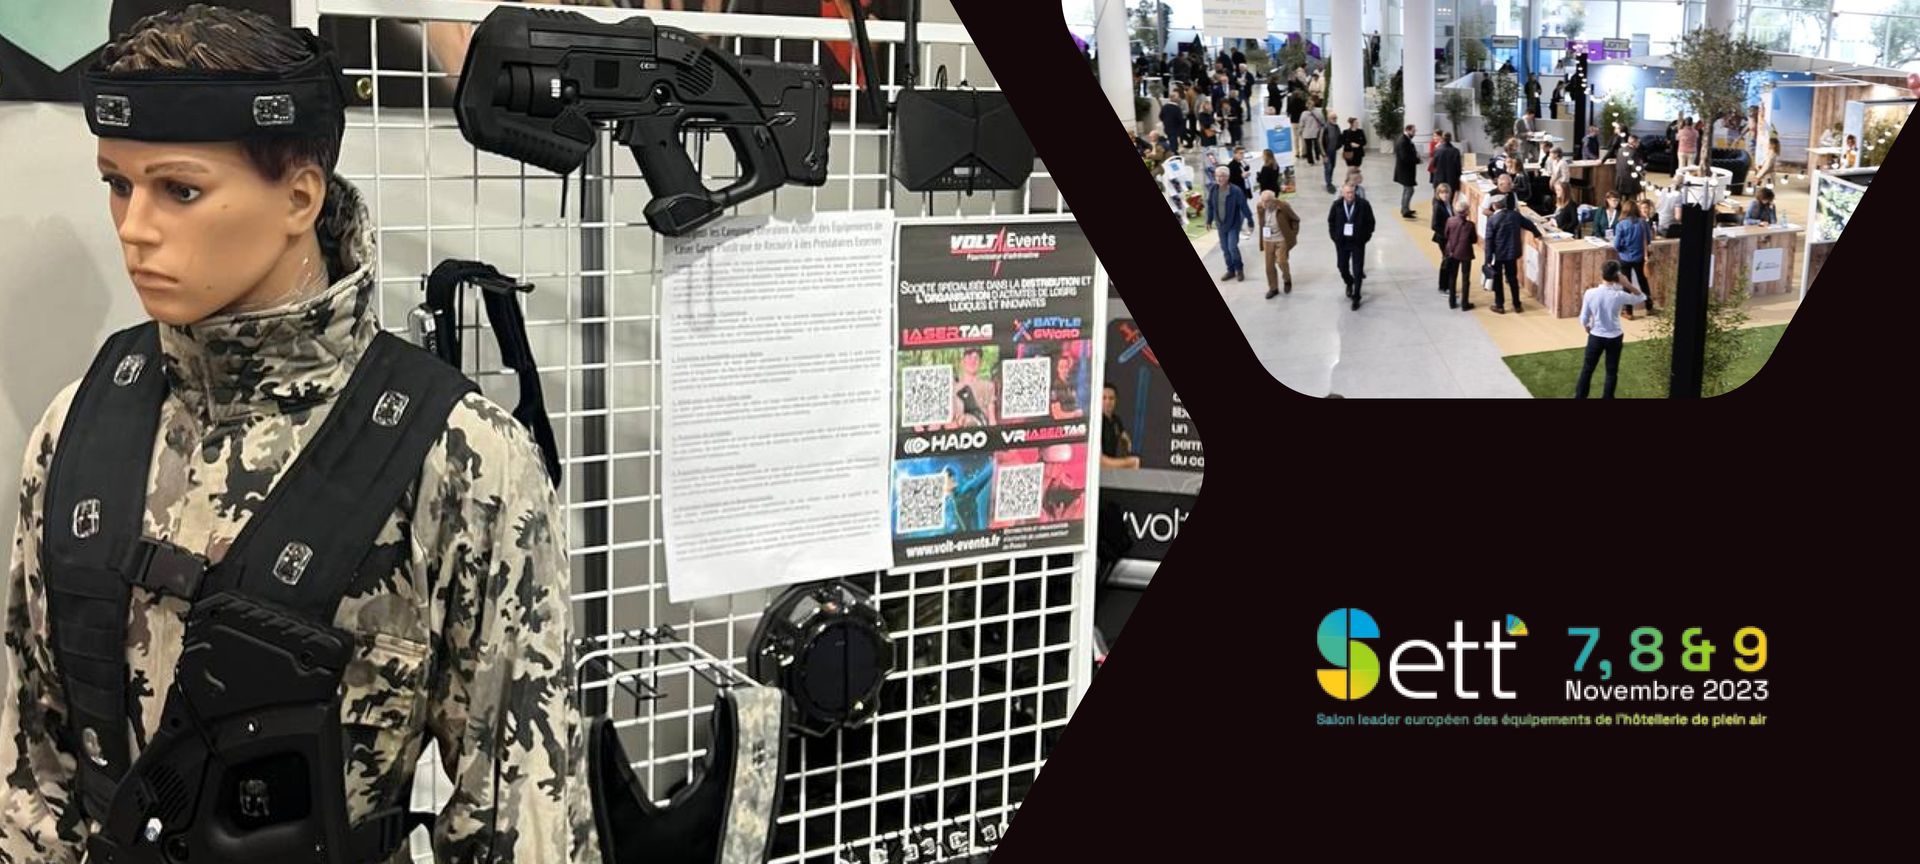 LASERTAG.NET dealer Volt Events presents products at SETT 2023 in France